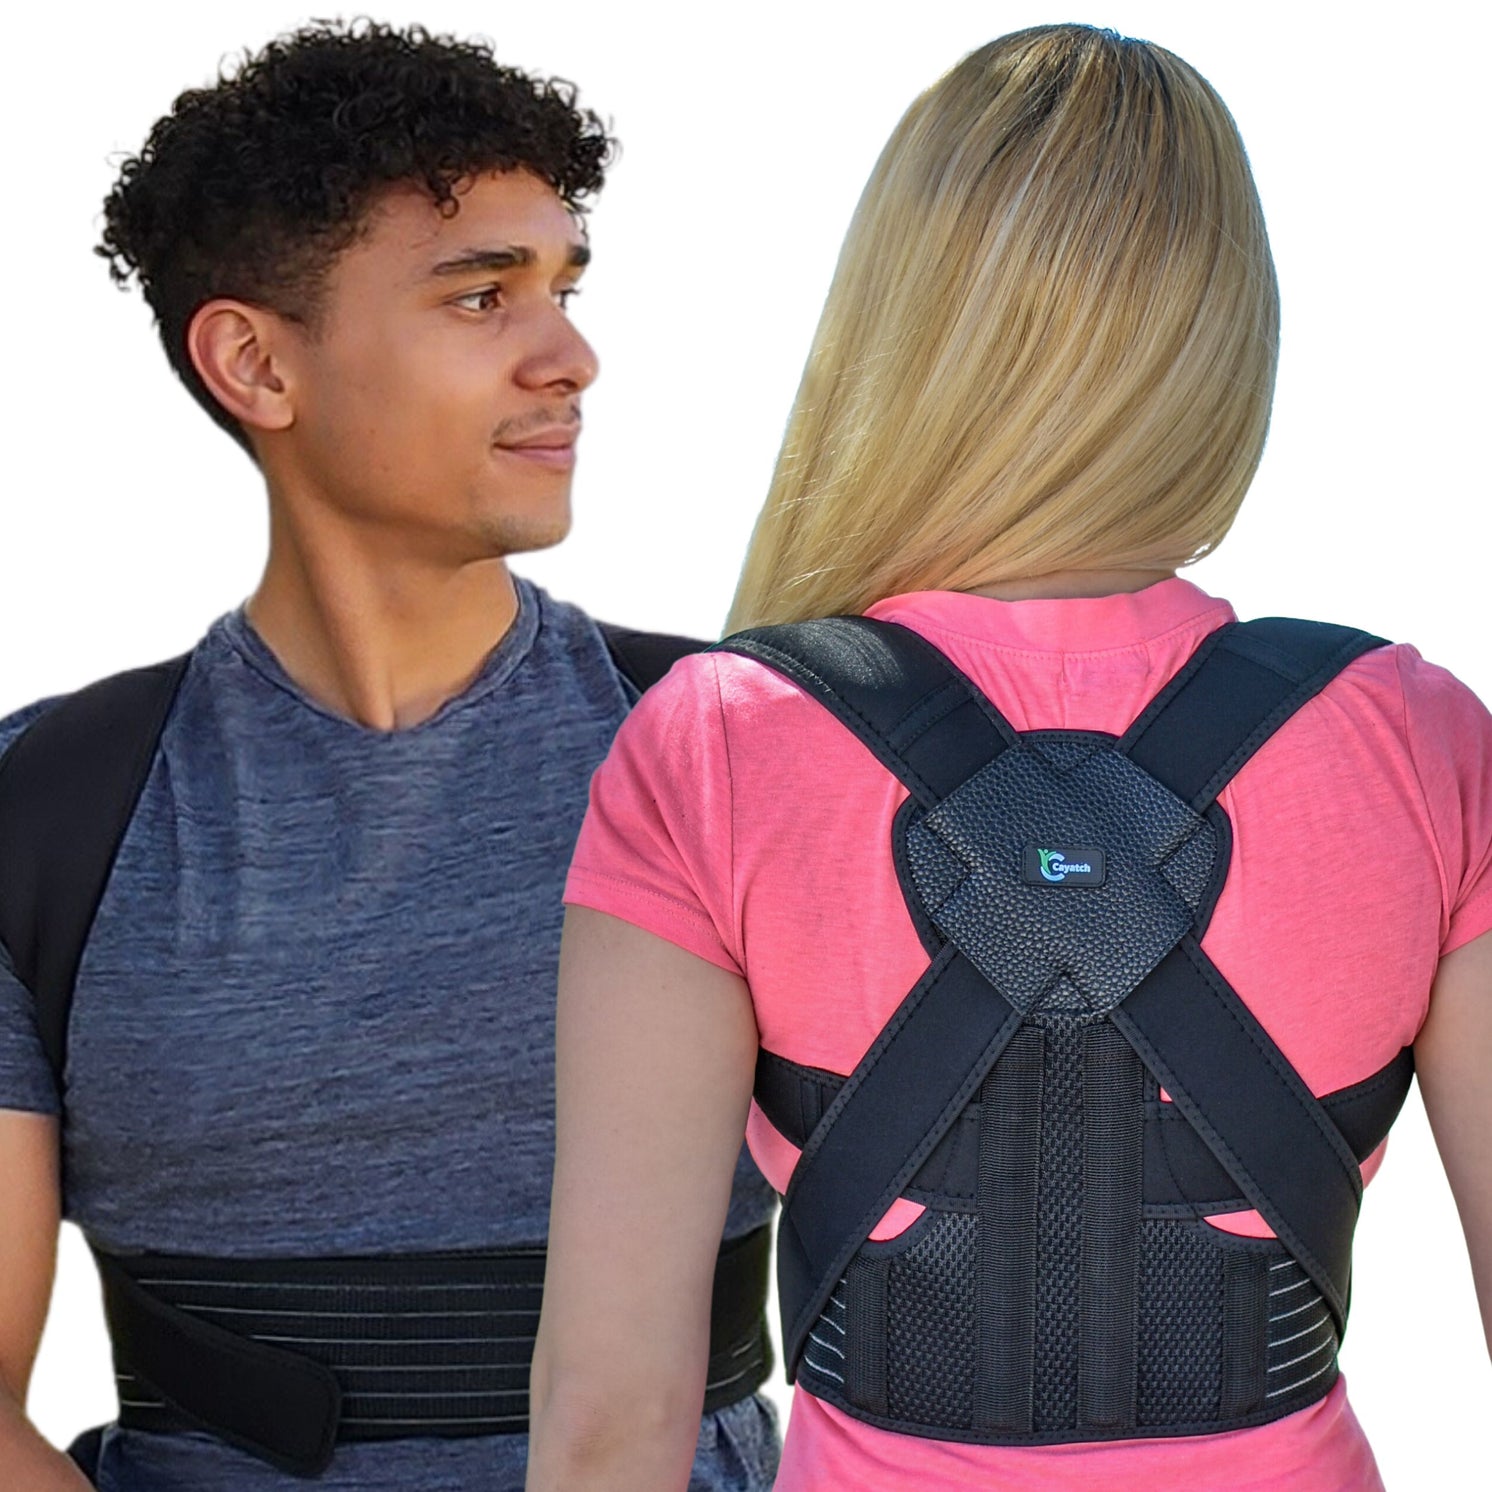 Relieve Back Pain & Improve Posture with Cayatch Orthopedic Back Brace Posture Corrector